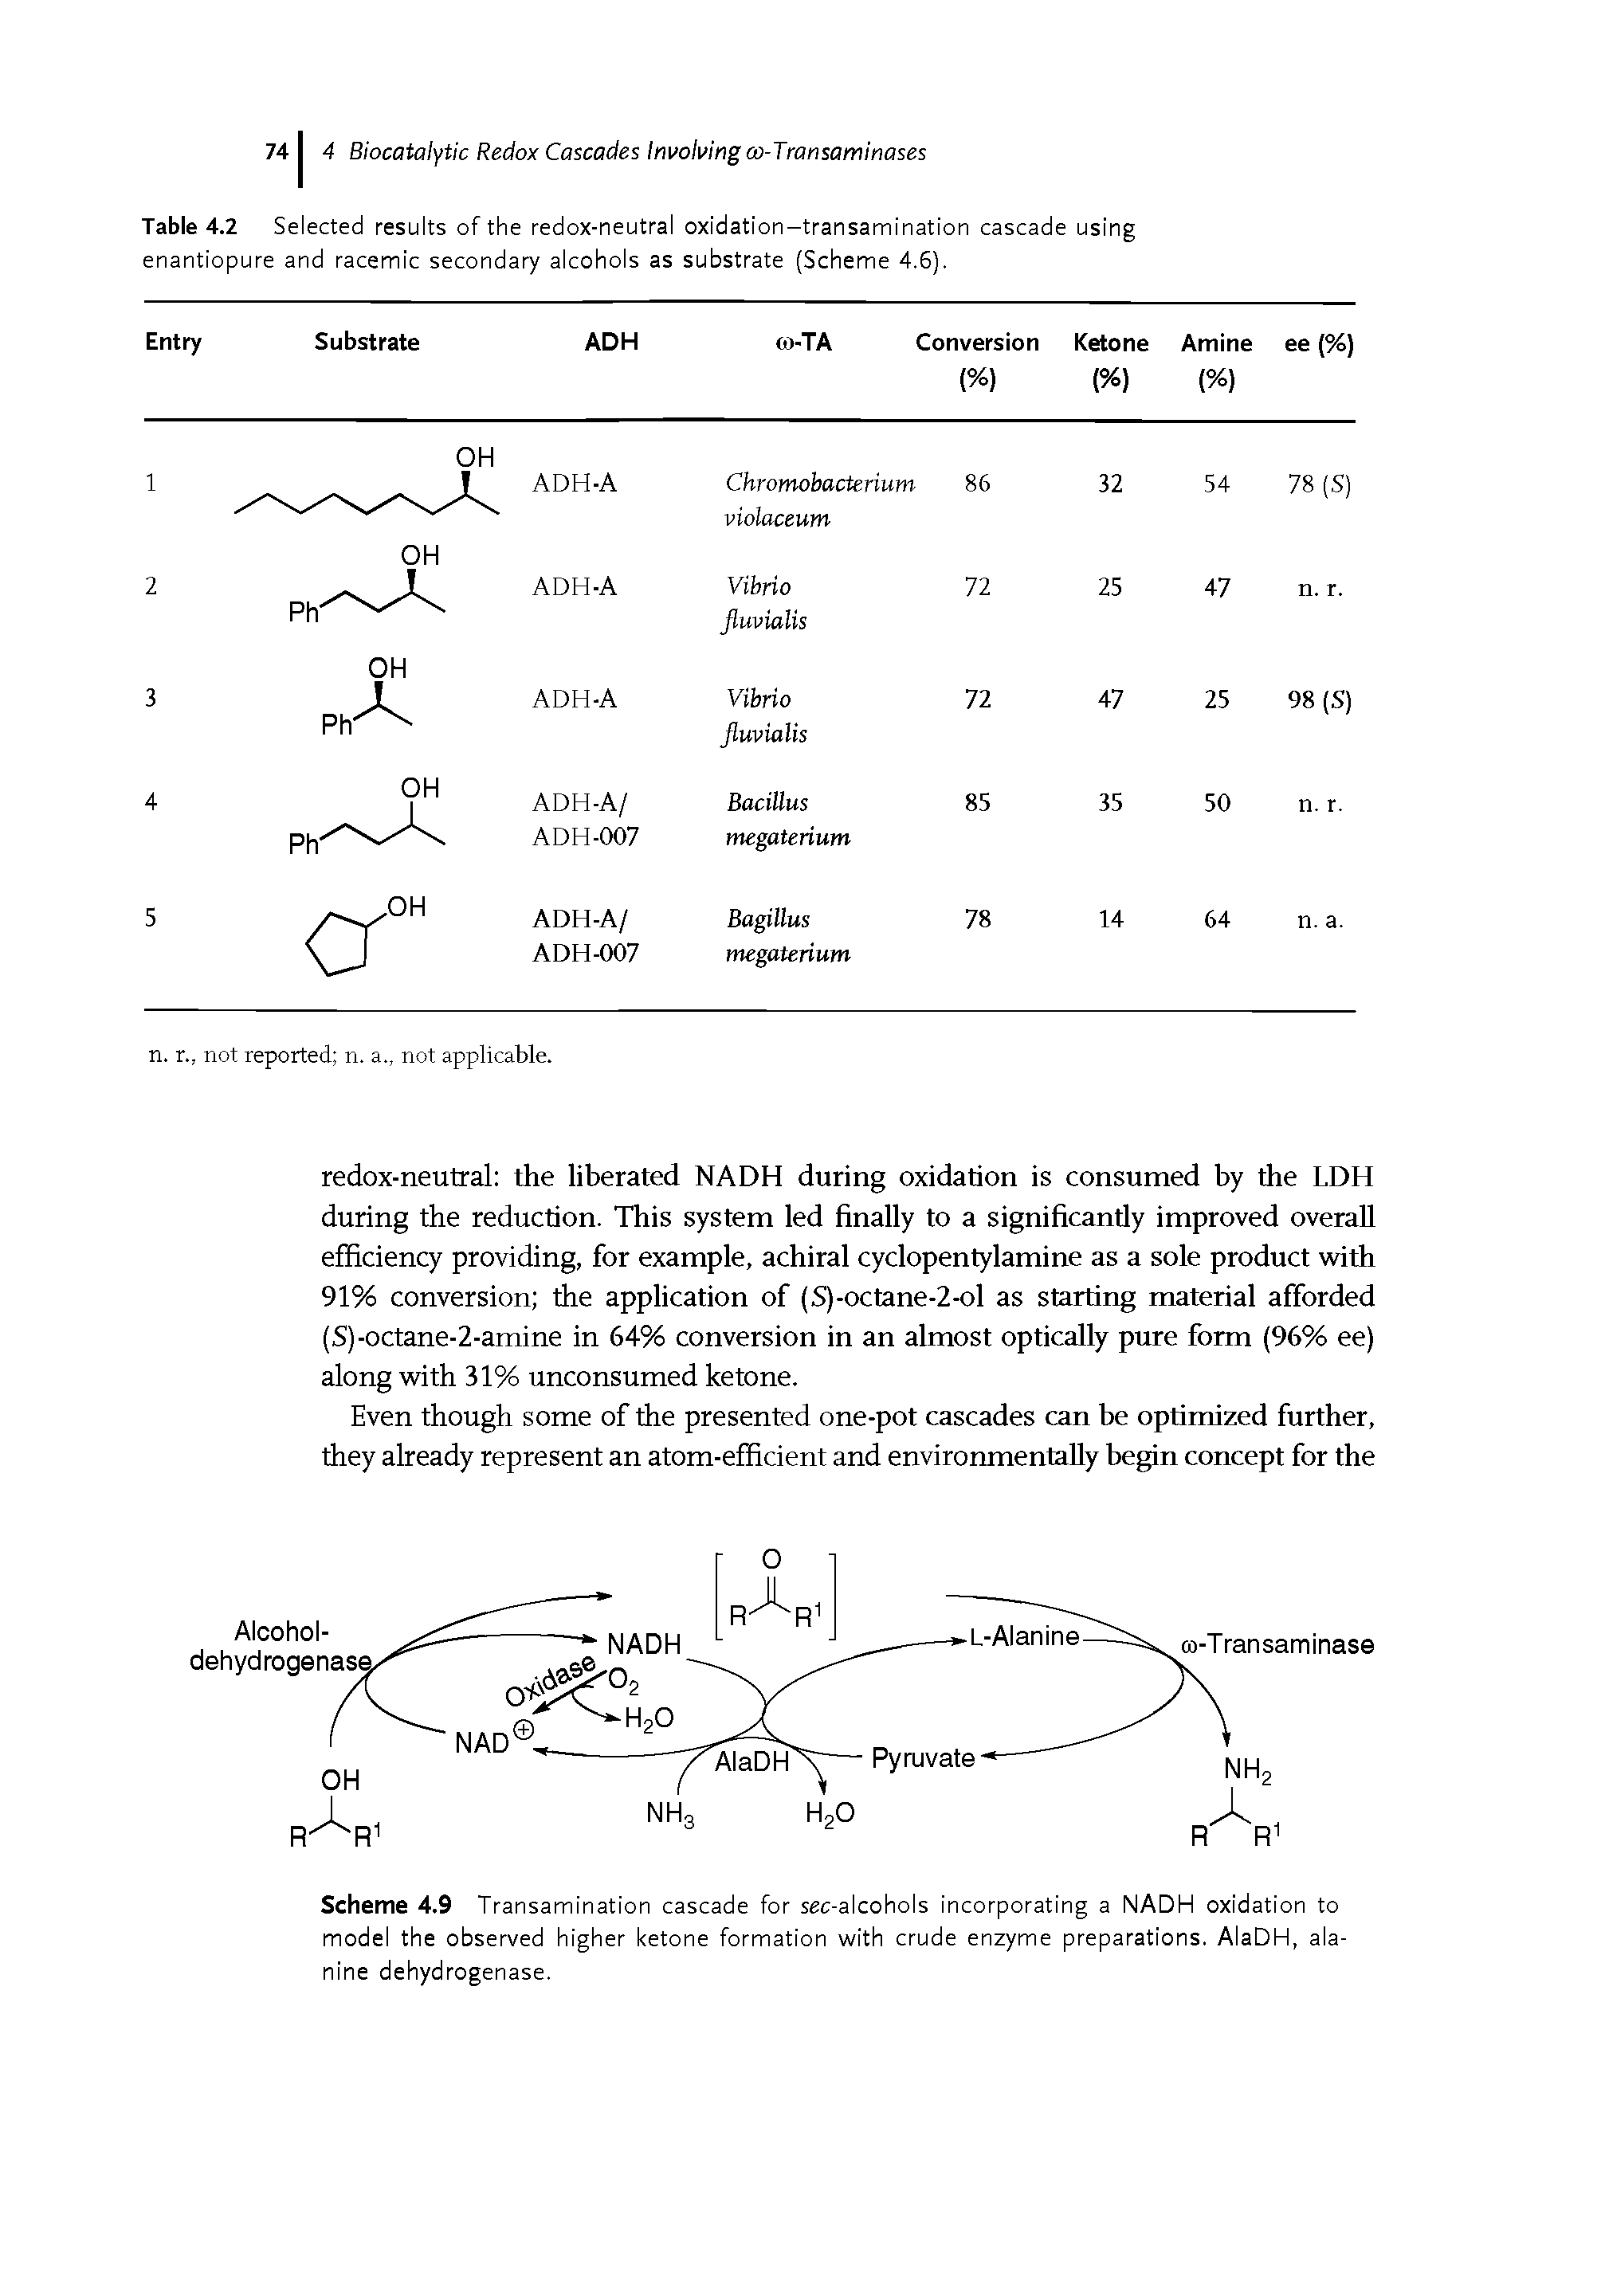 Table 4.2 Selected results of the redox-neutral oxidation-transamination cascade using enantiopure and racemic secondary alcohols as substrate (Scheme 4.5).